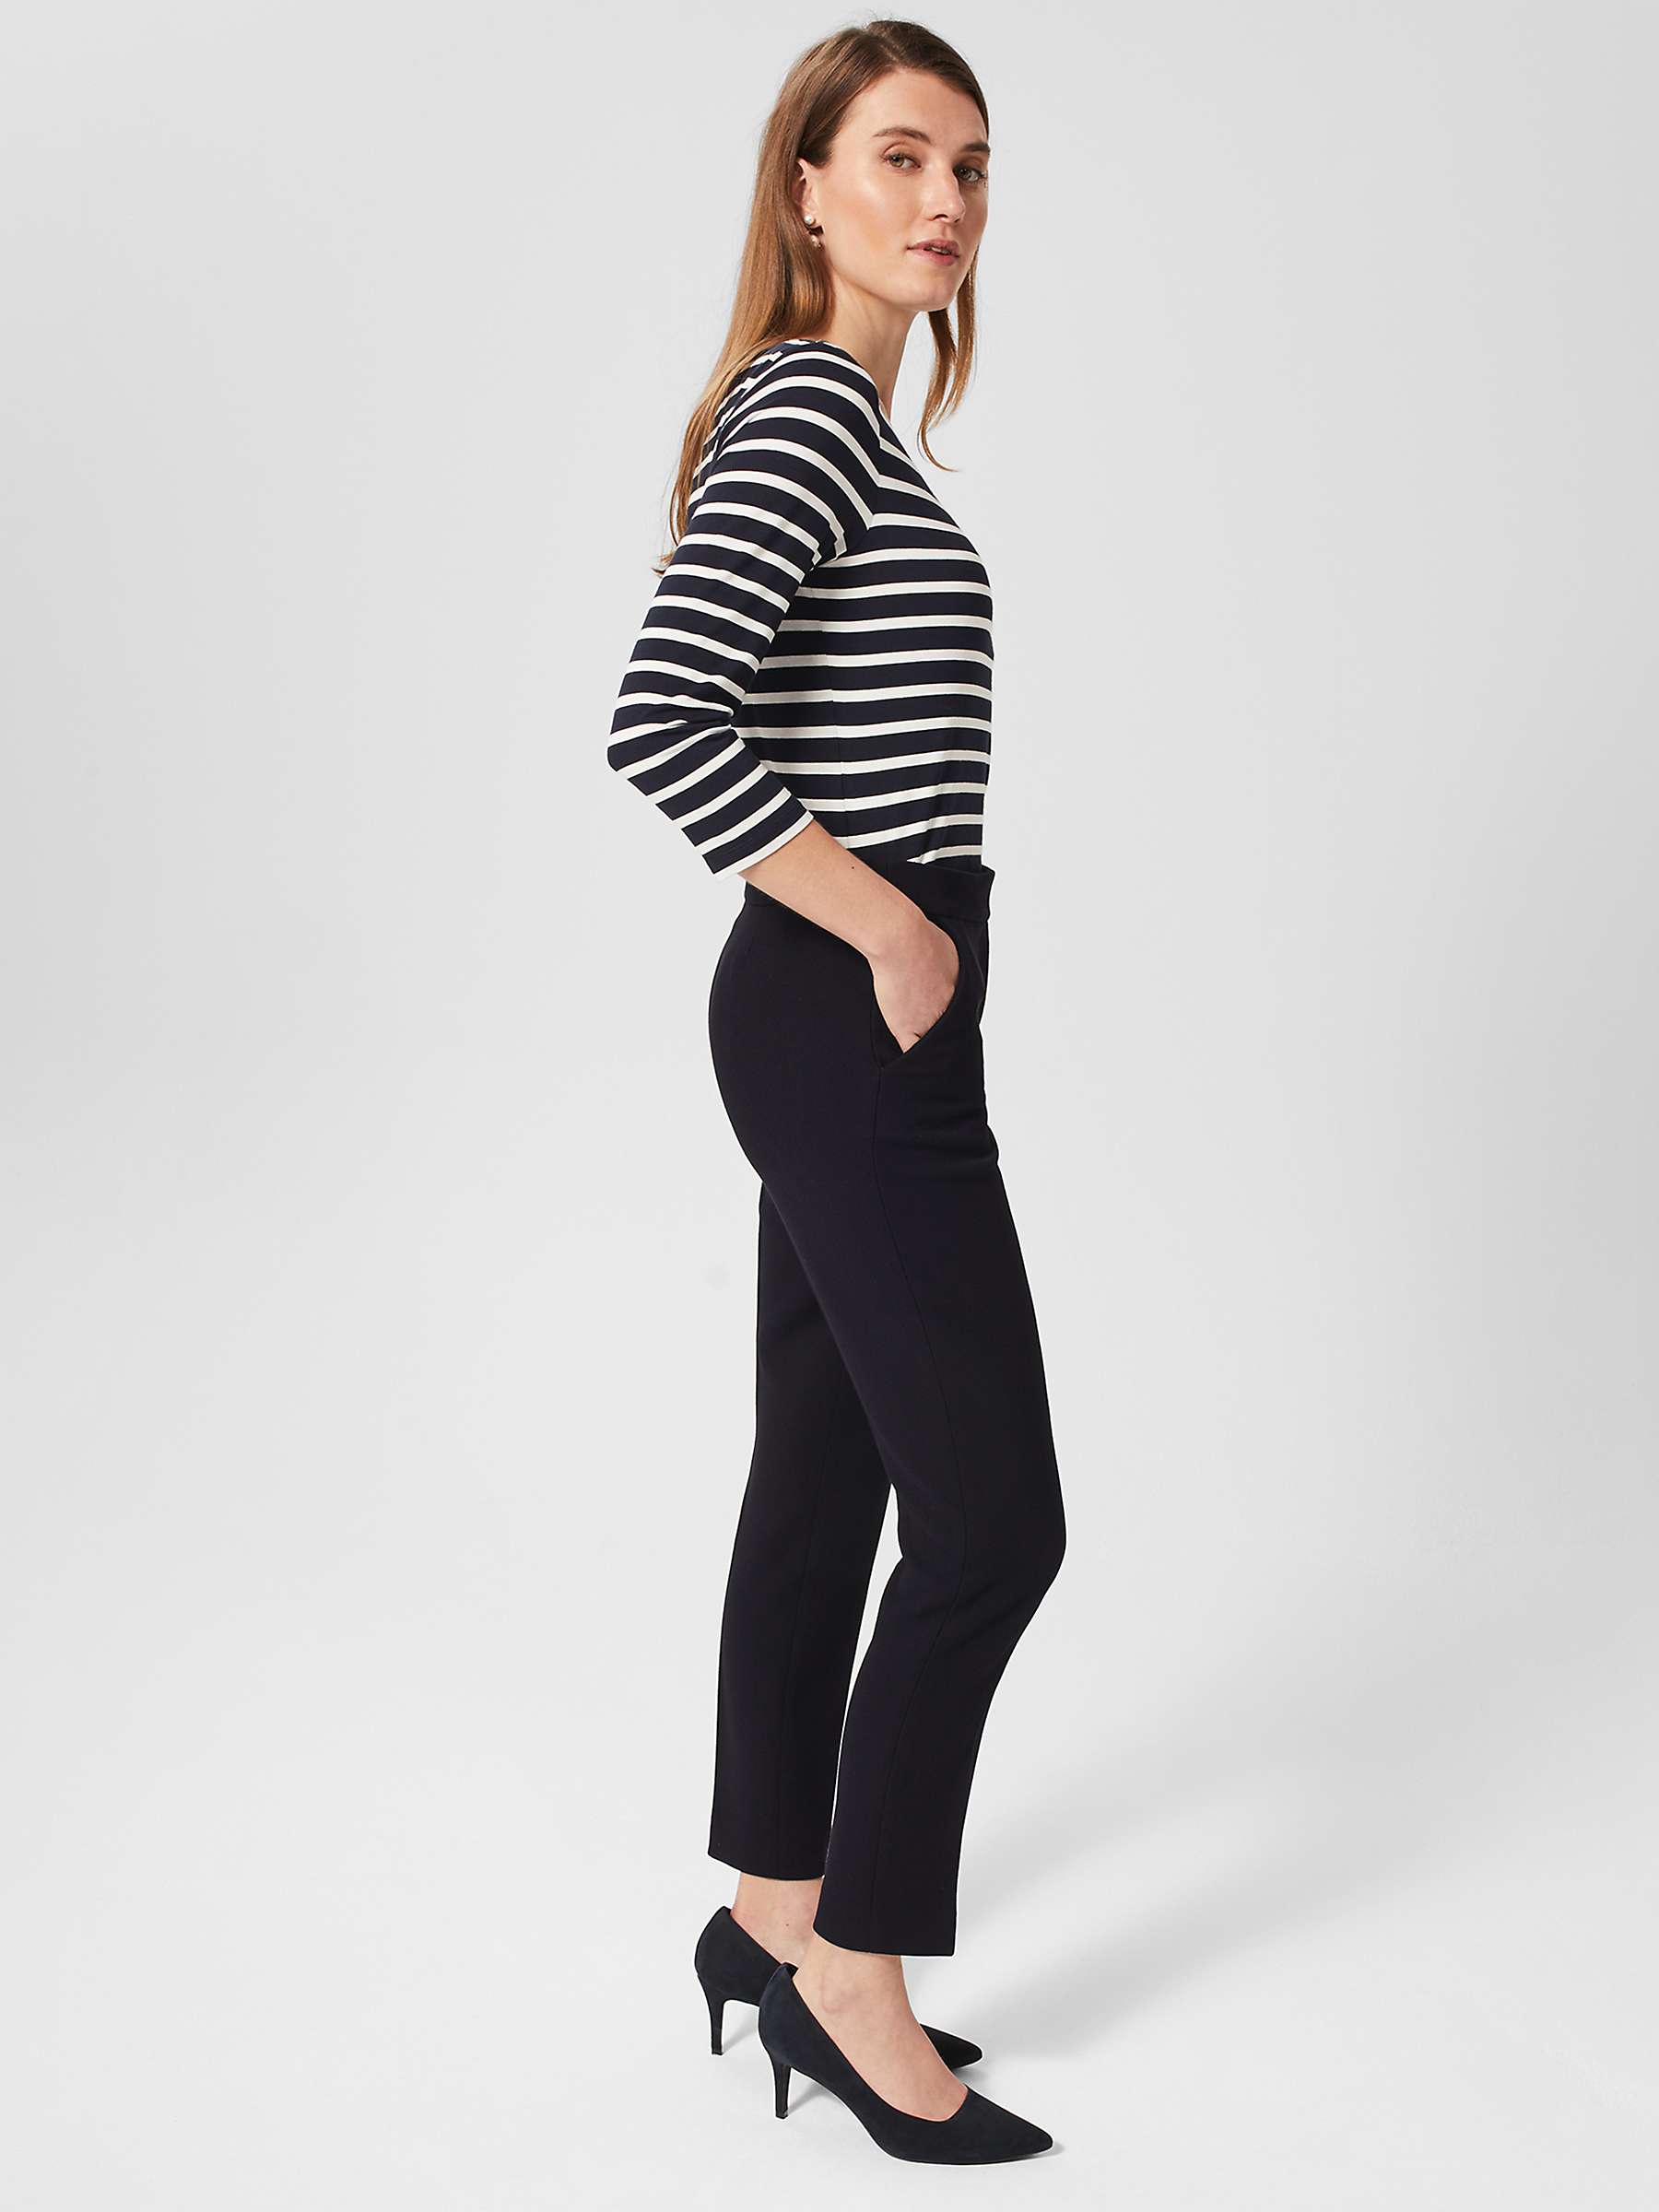 Buy Hobbs Mia Tapered Ankle Grazer Trousers, Navy Online at johnlewis.com